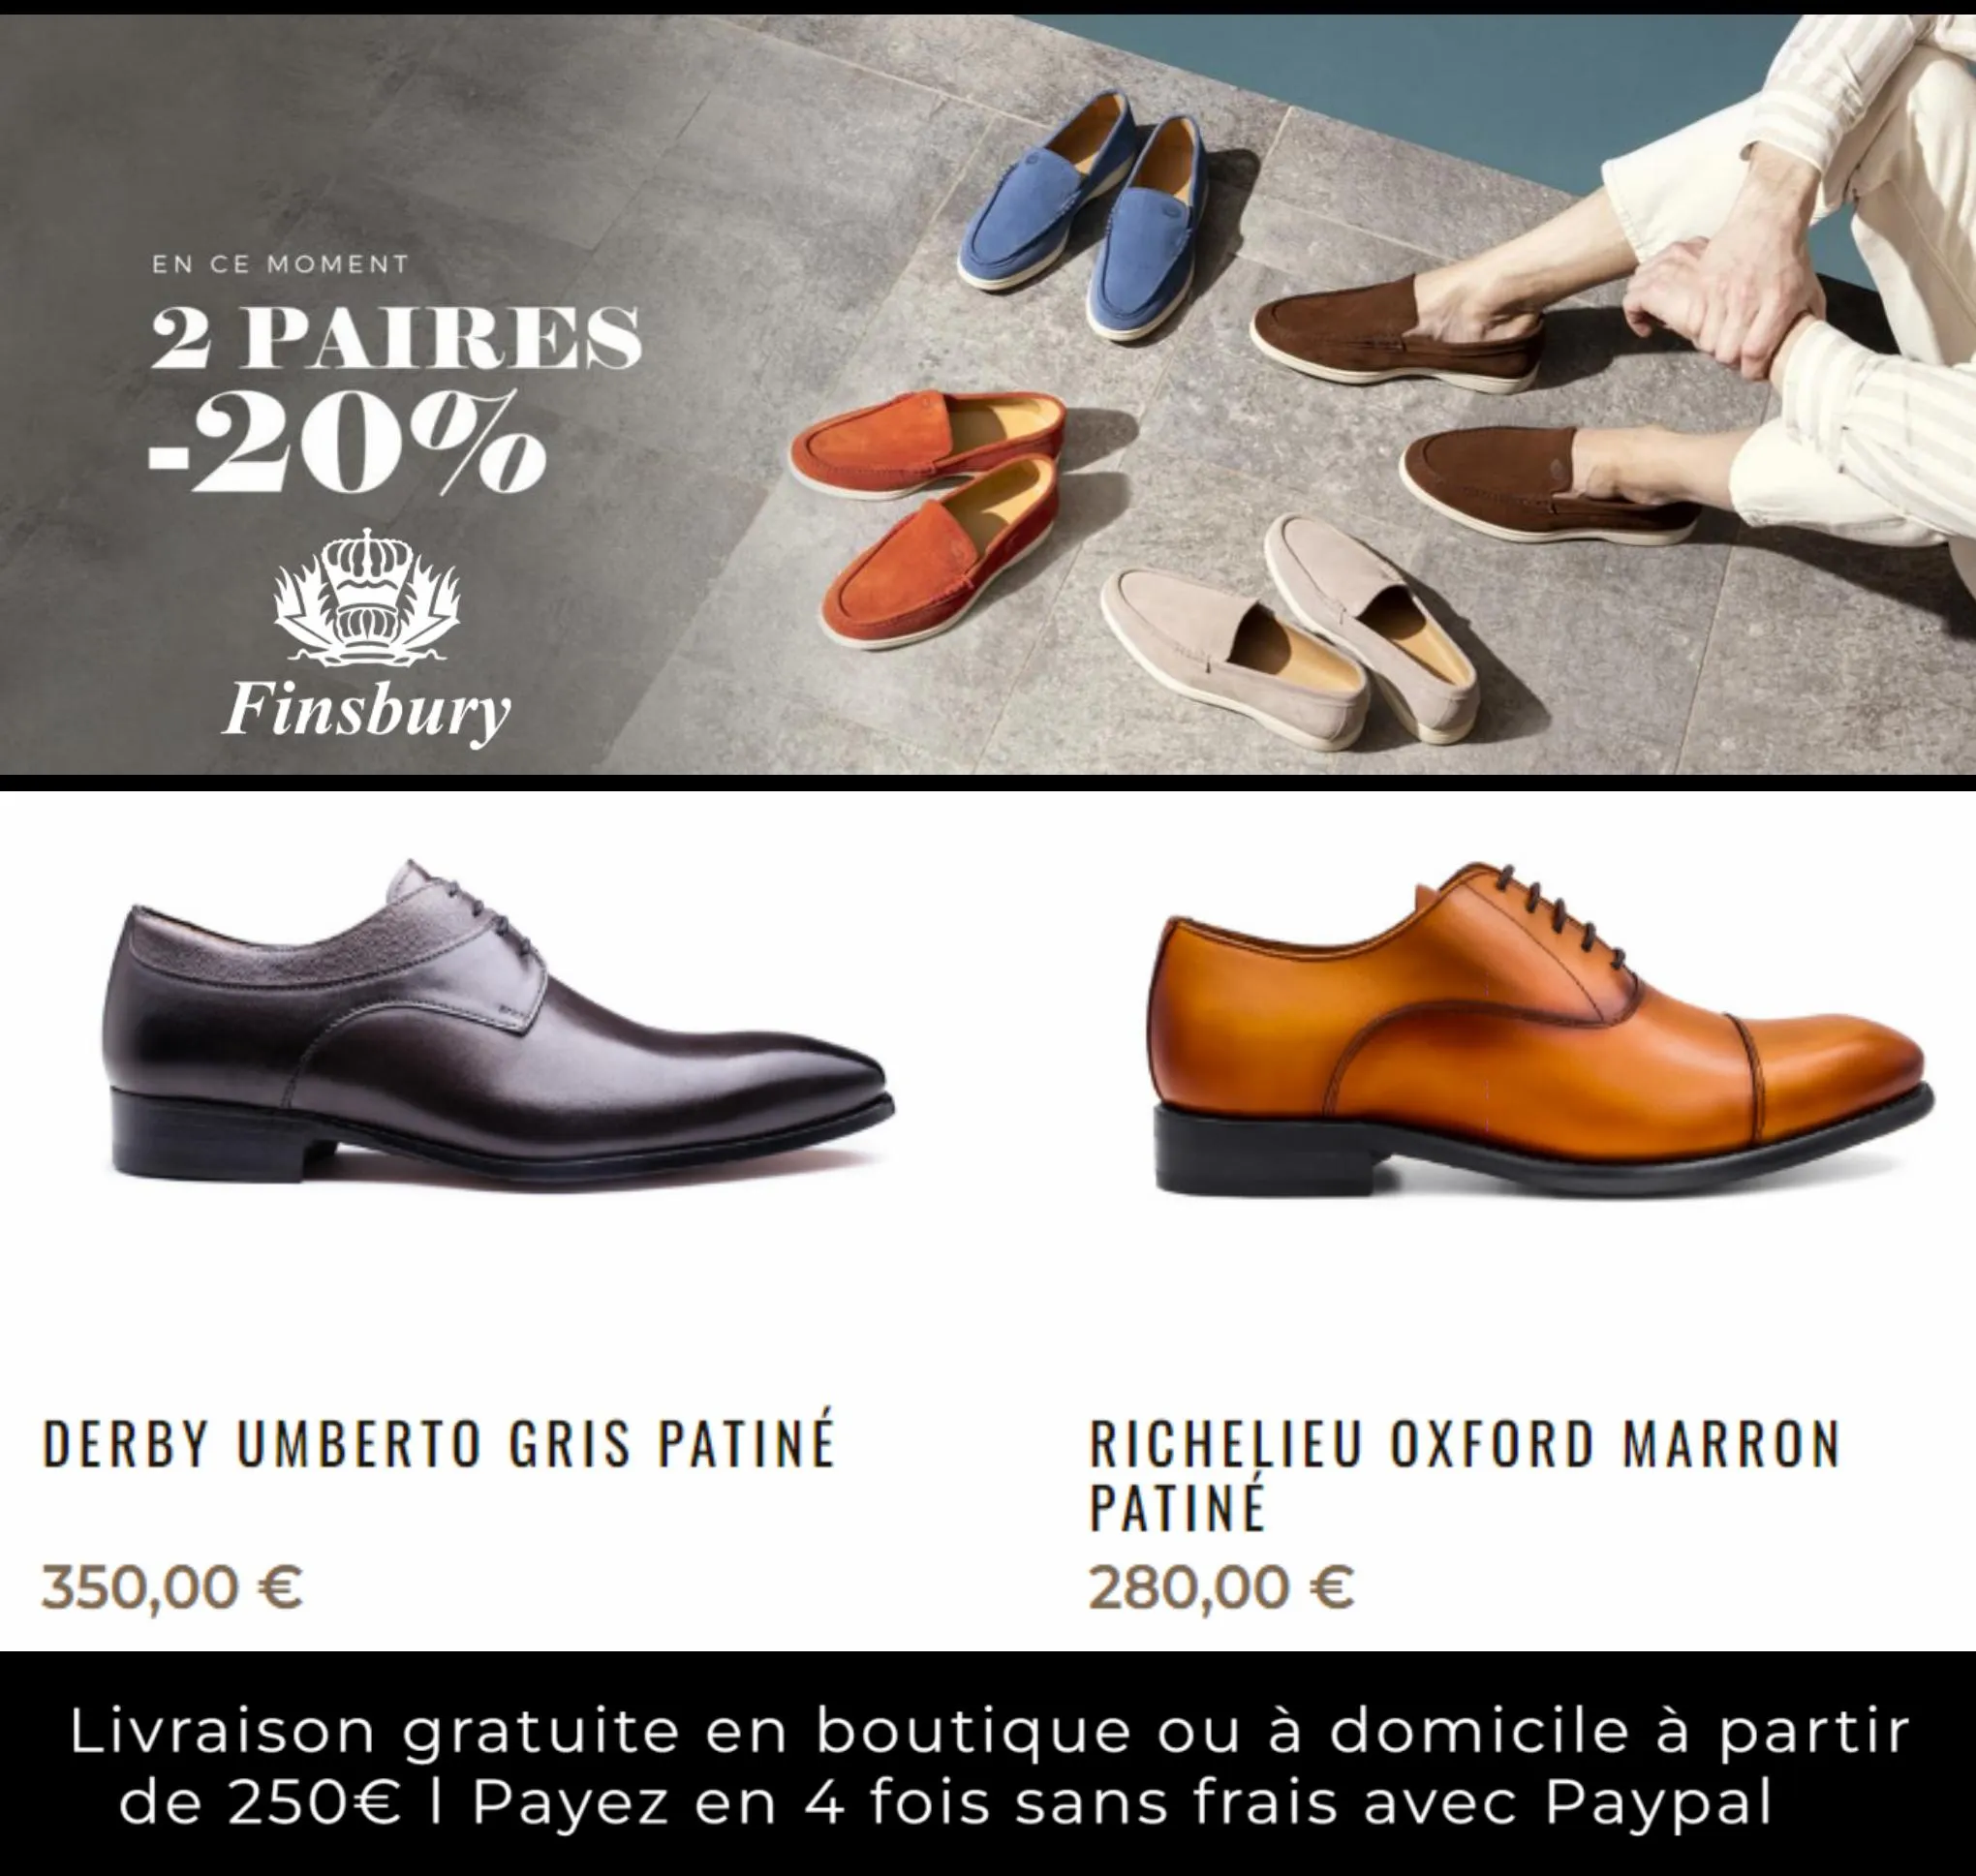 Catalogue 2 Paires -20%, page 00003